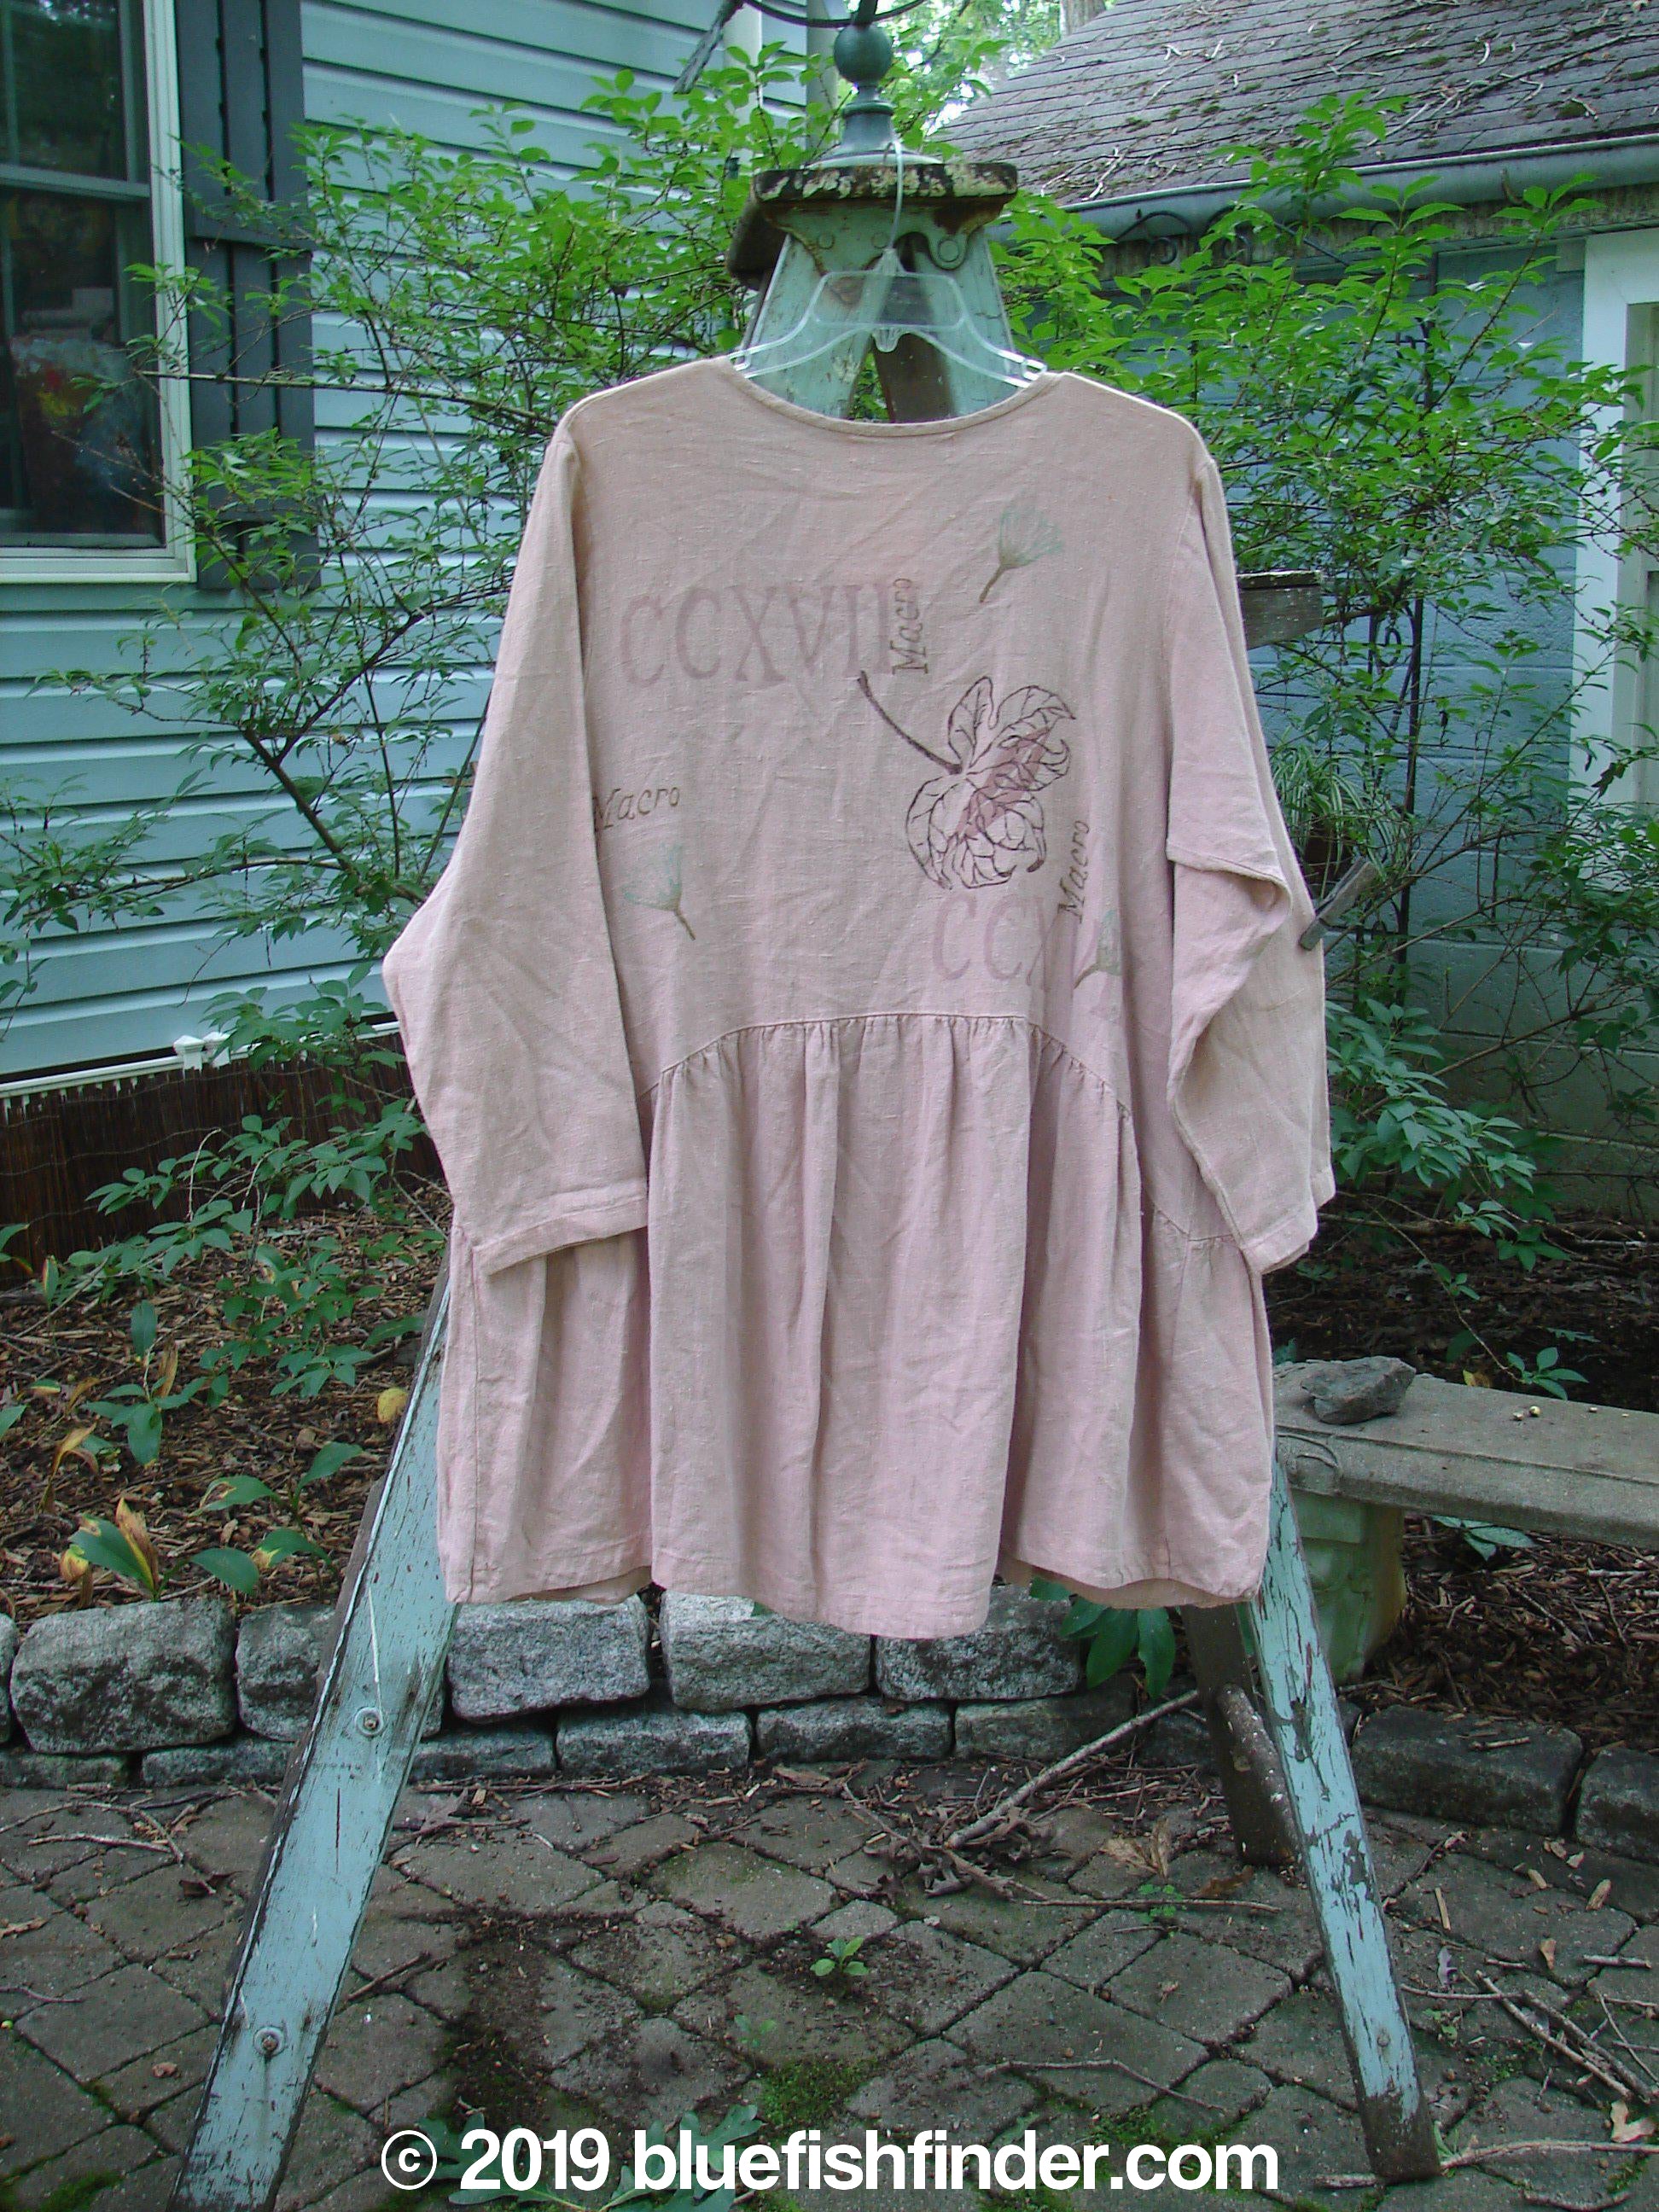 1998 Botanicals Meadow Jacket Macro Mallow Size 1: A pink shirt with a flower design on a clothes rack.